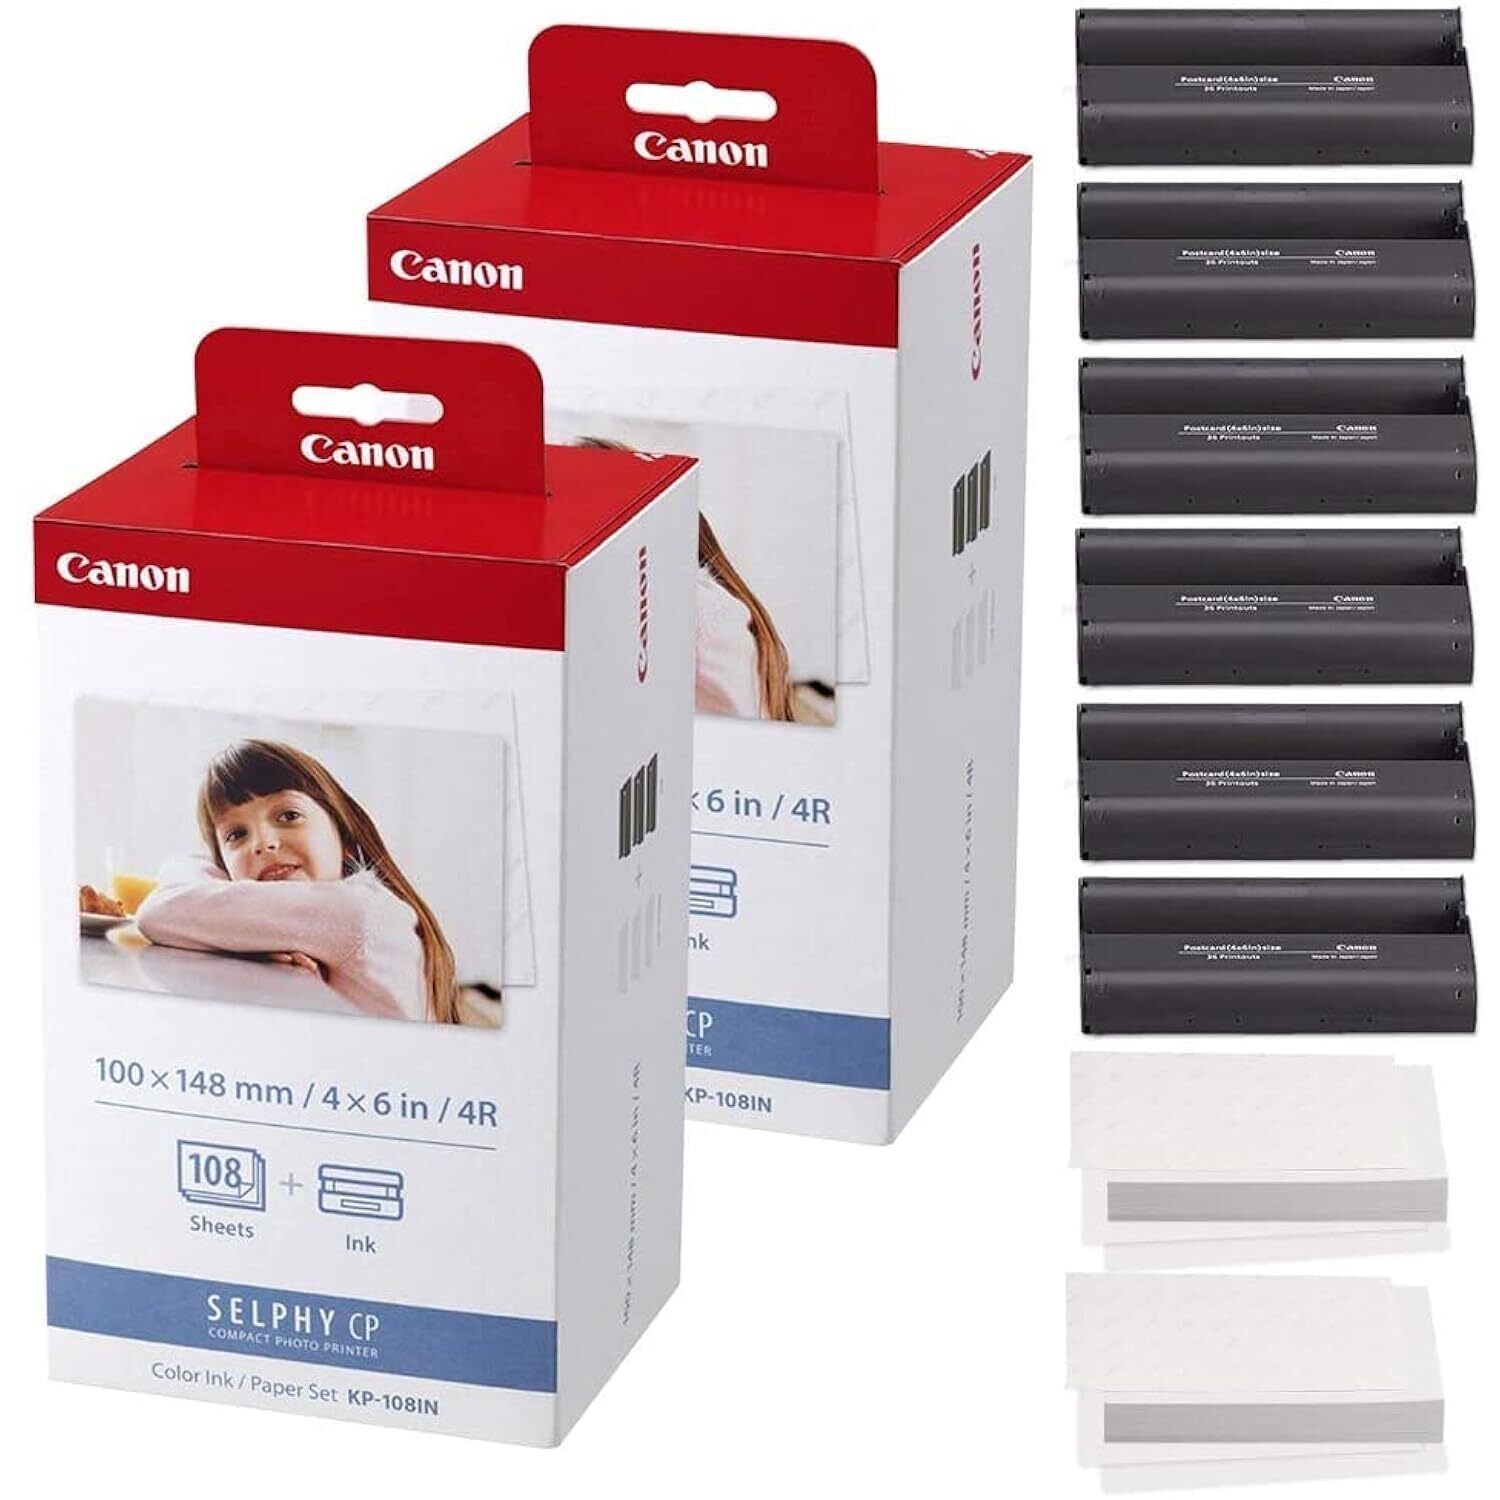 Canon KP-108IN Color Ink and Paper Set - Total of 216 Sheets and 6 Ink Cartrid